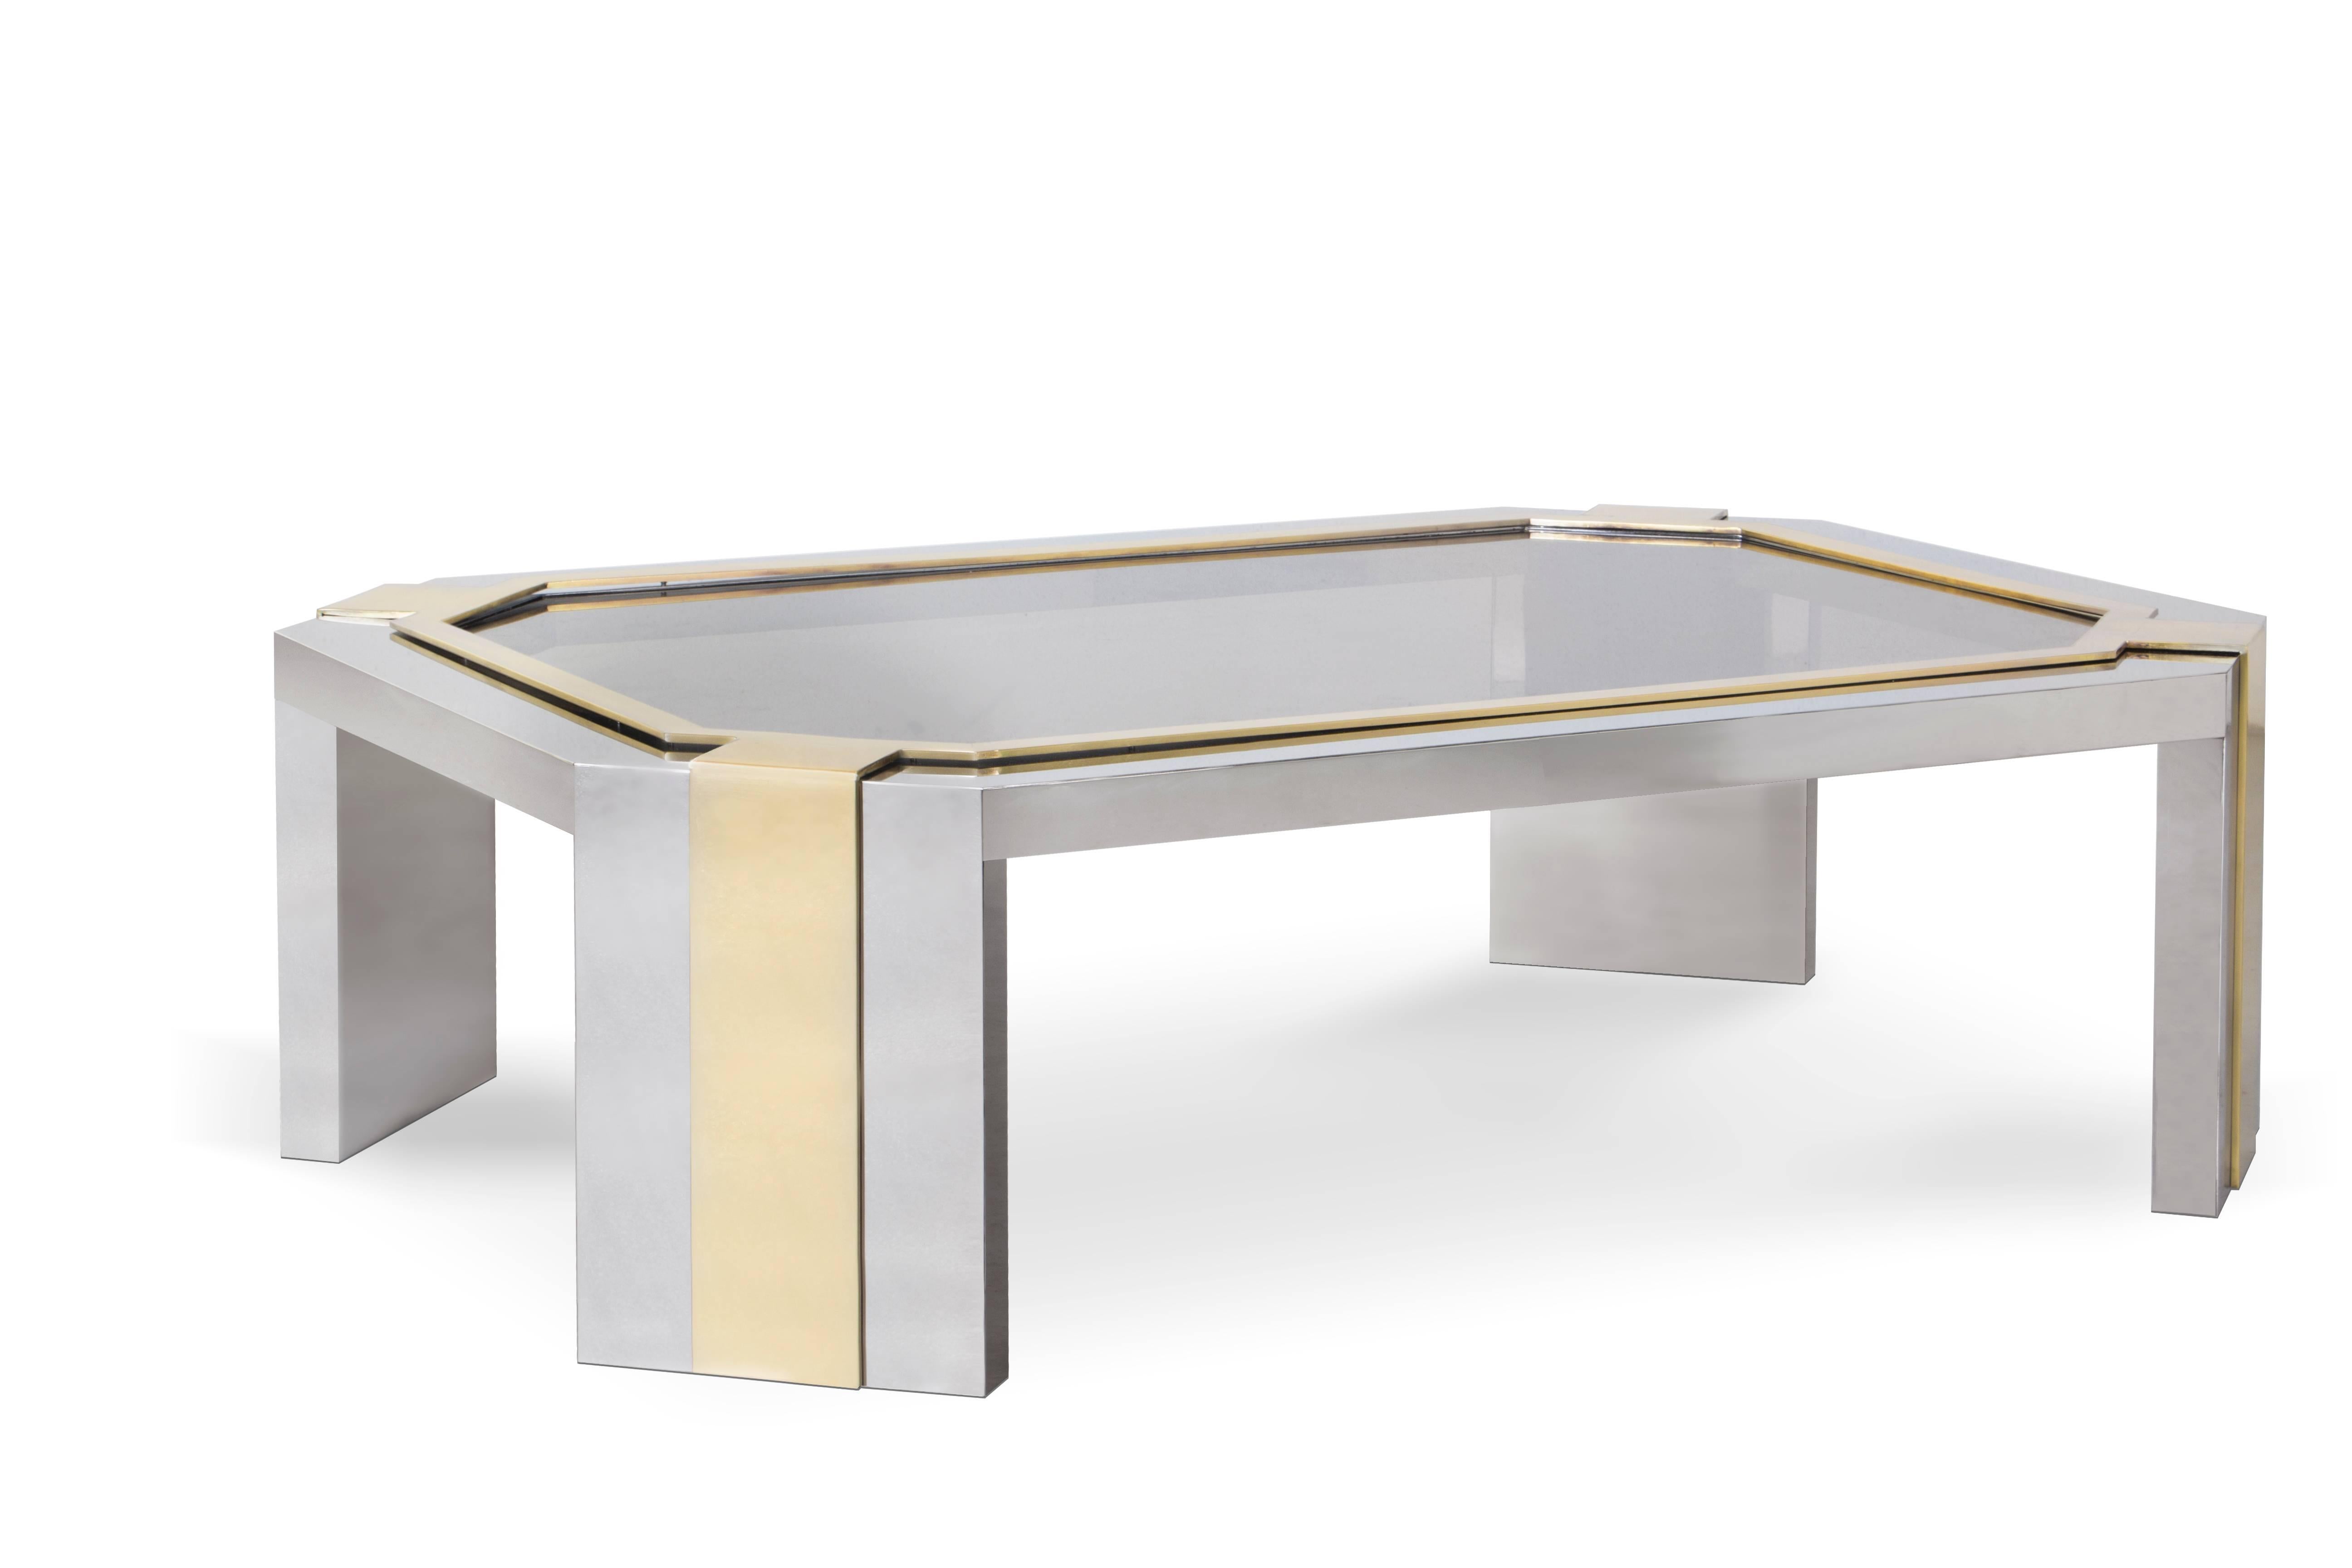 You won’t be able to refuse the allure of the minx coffee table. Her structured geometric frame is coupled with an exotic blend of metals and a mirrored top, capturing the awe and desire of her many admirers.

Standard finish as shown:
Top: